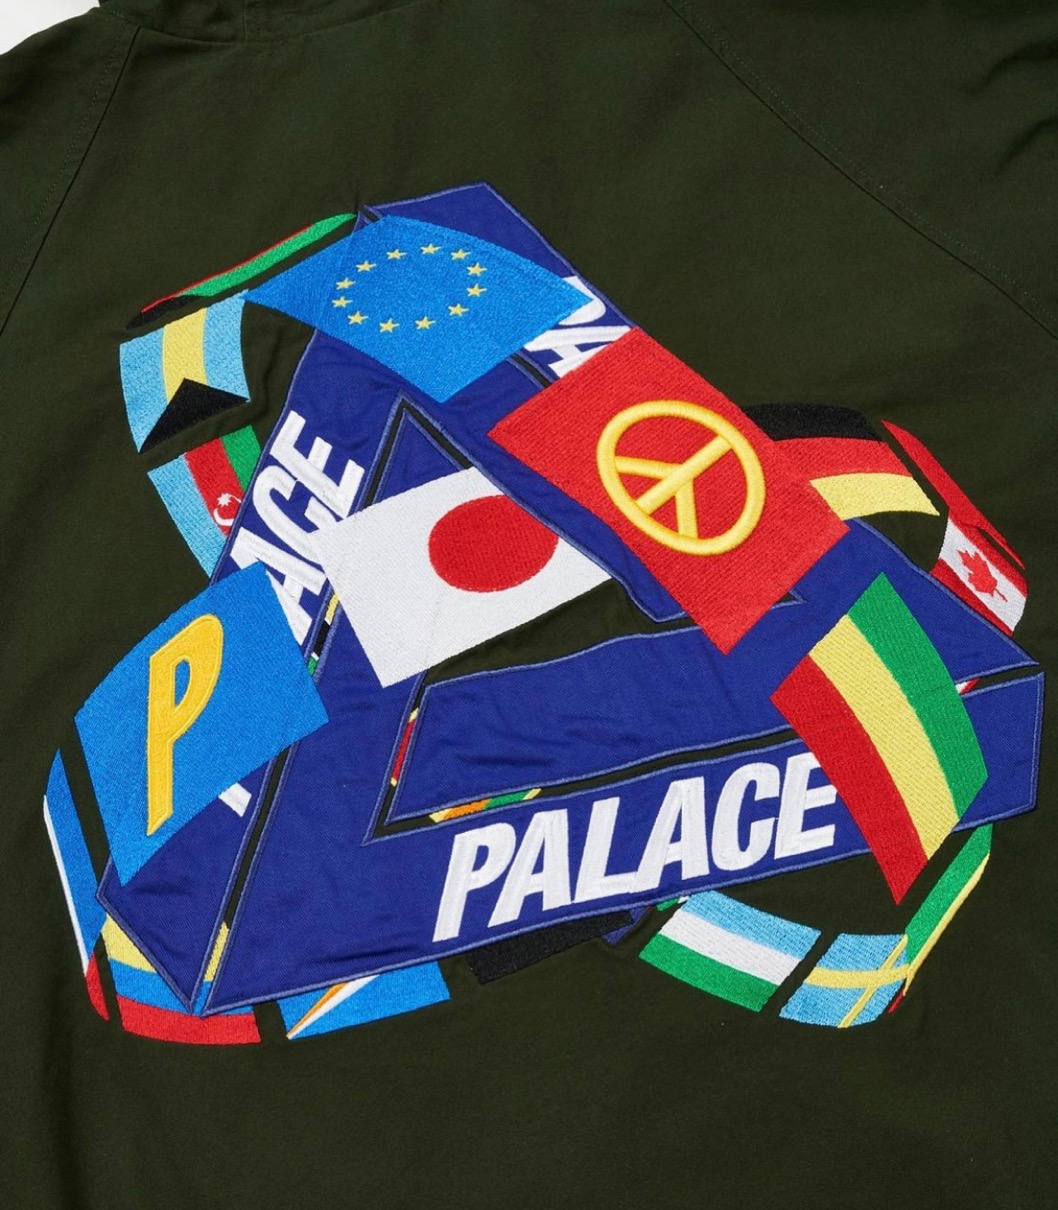 【PALACE SKATEBOARDS】2021年夏コレクションのティーザー画像が公開 | UP TO DATE